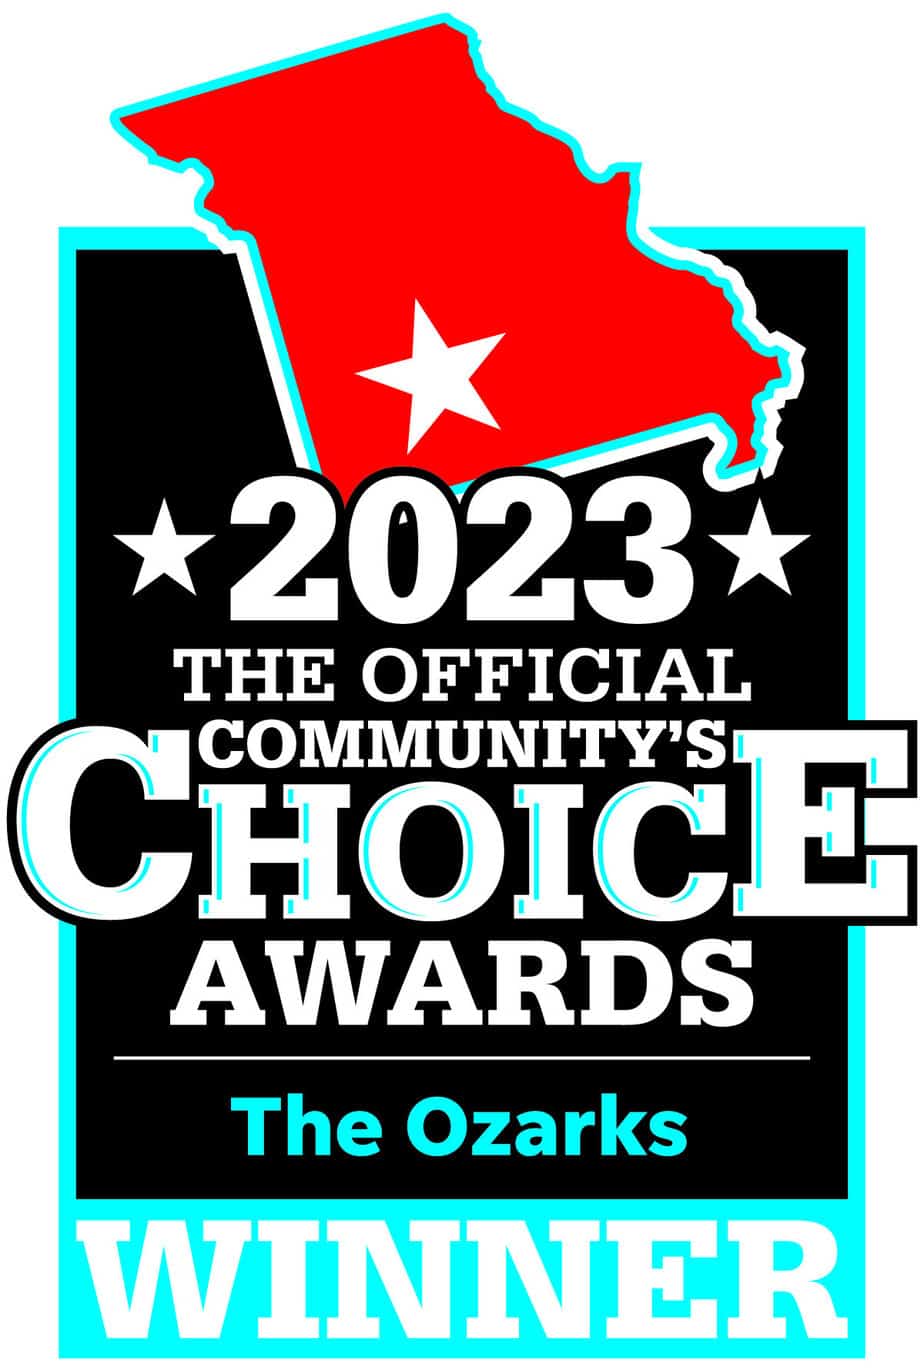 2023 The Official Community's Choice Awards Winner - The Ozarks